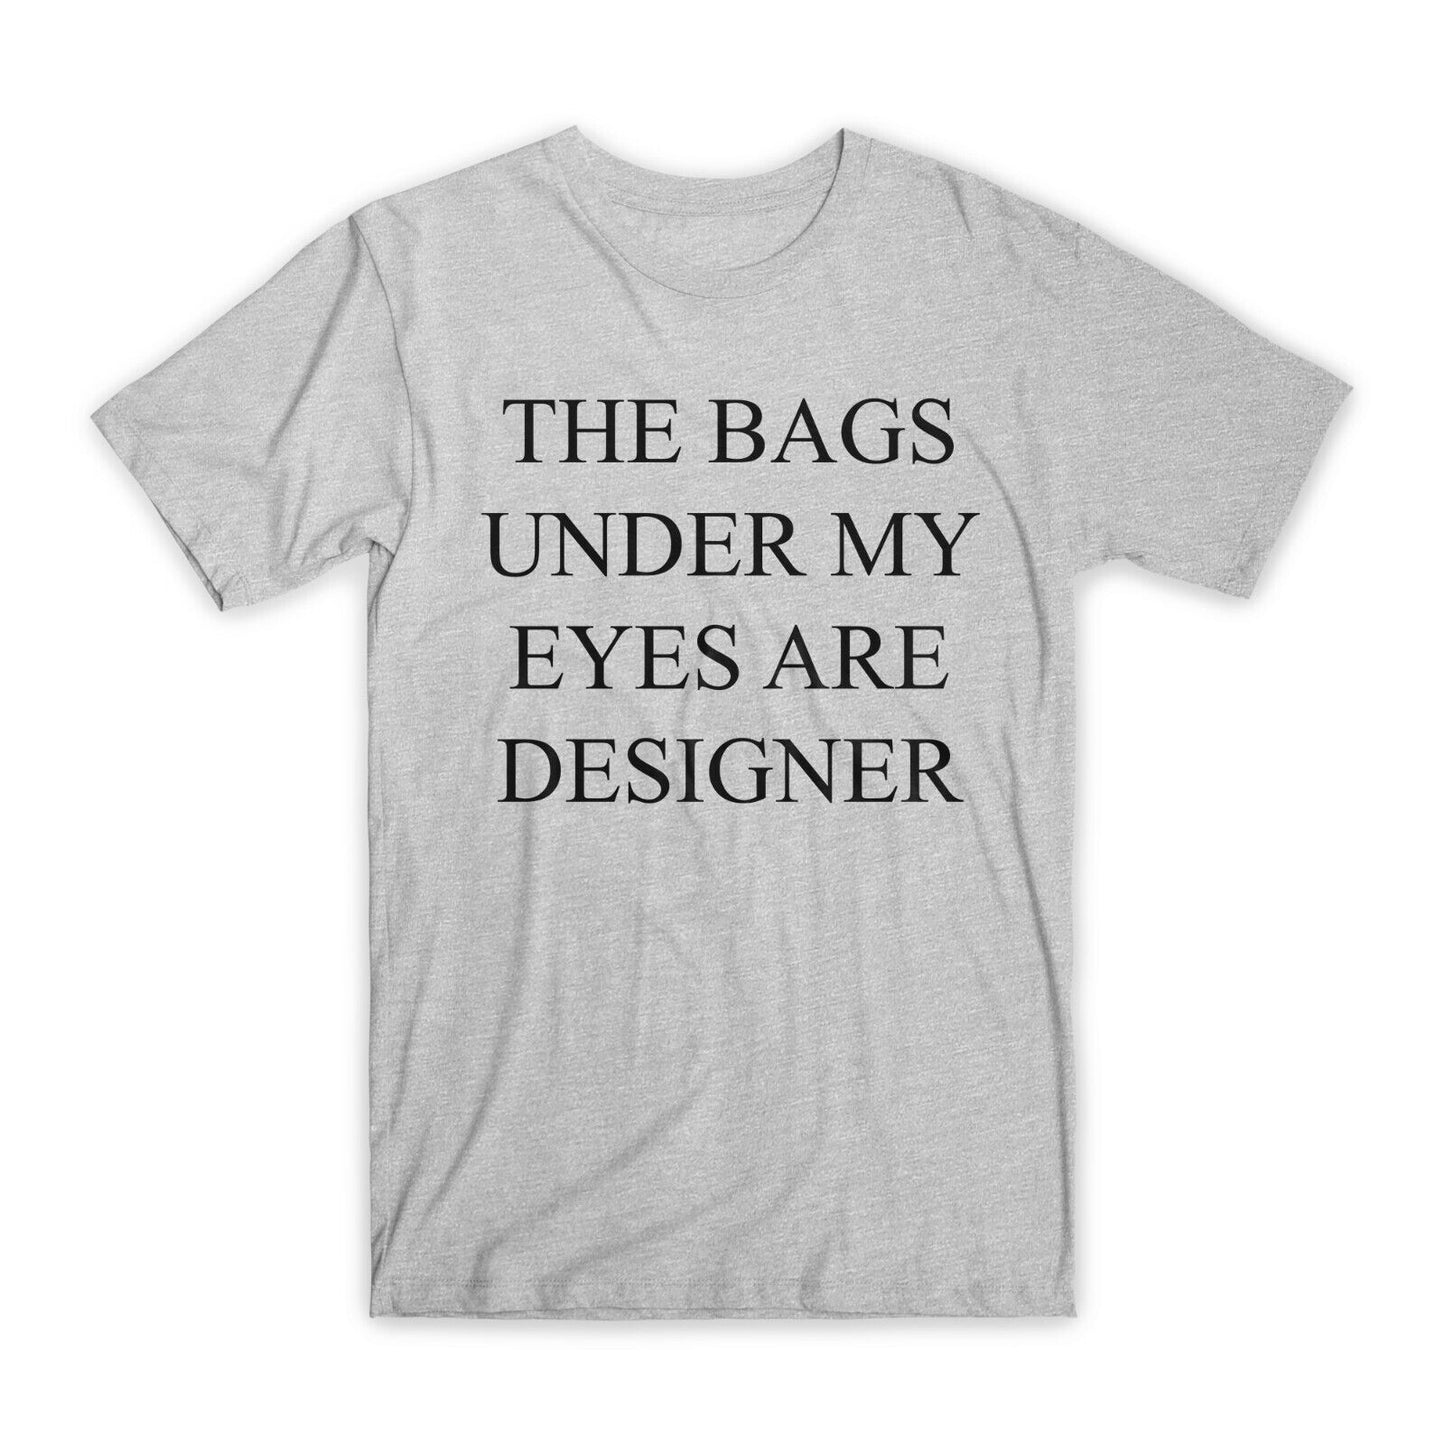 The Bags Under My Eyes Are Designer T-Shirt Premium Soft Cotton Funny T Gift NEW